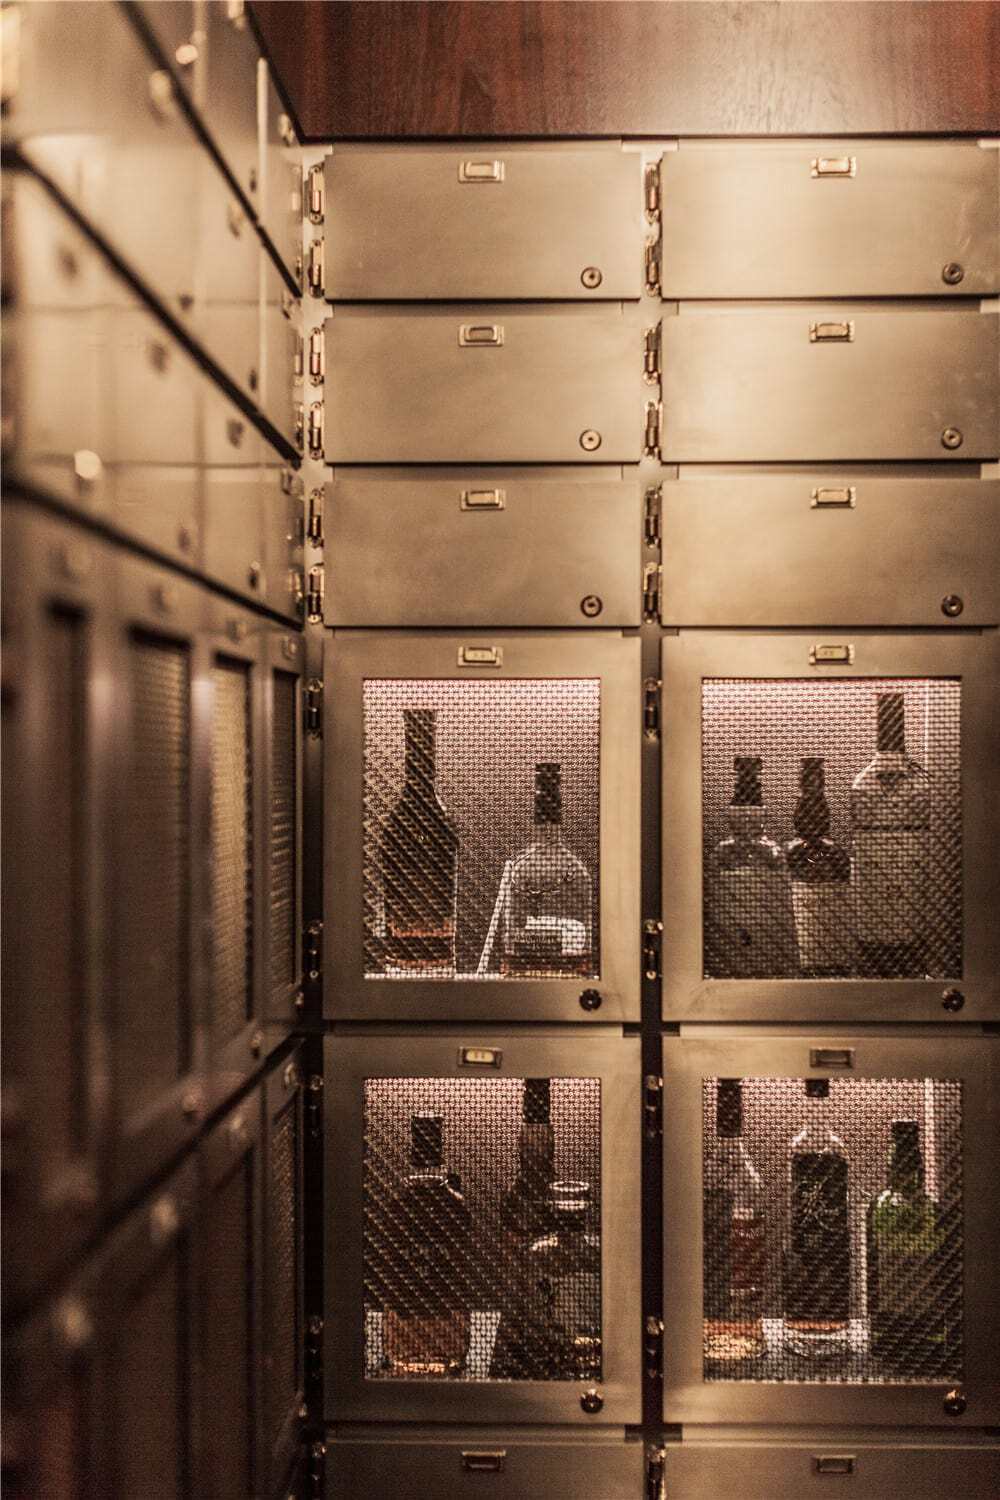 The wines from patrons stored at stainless steel compartments.